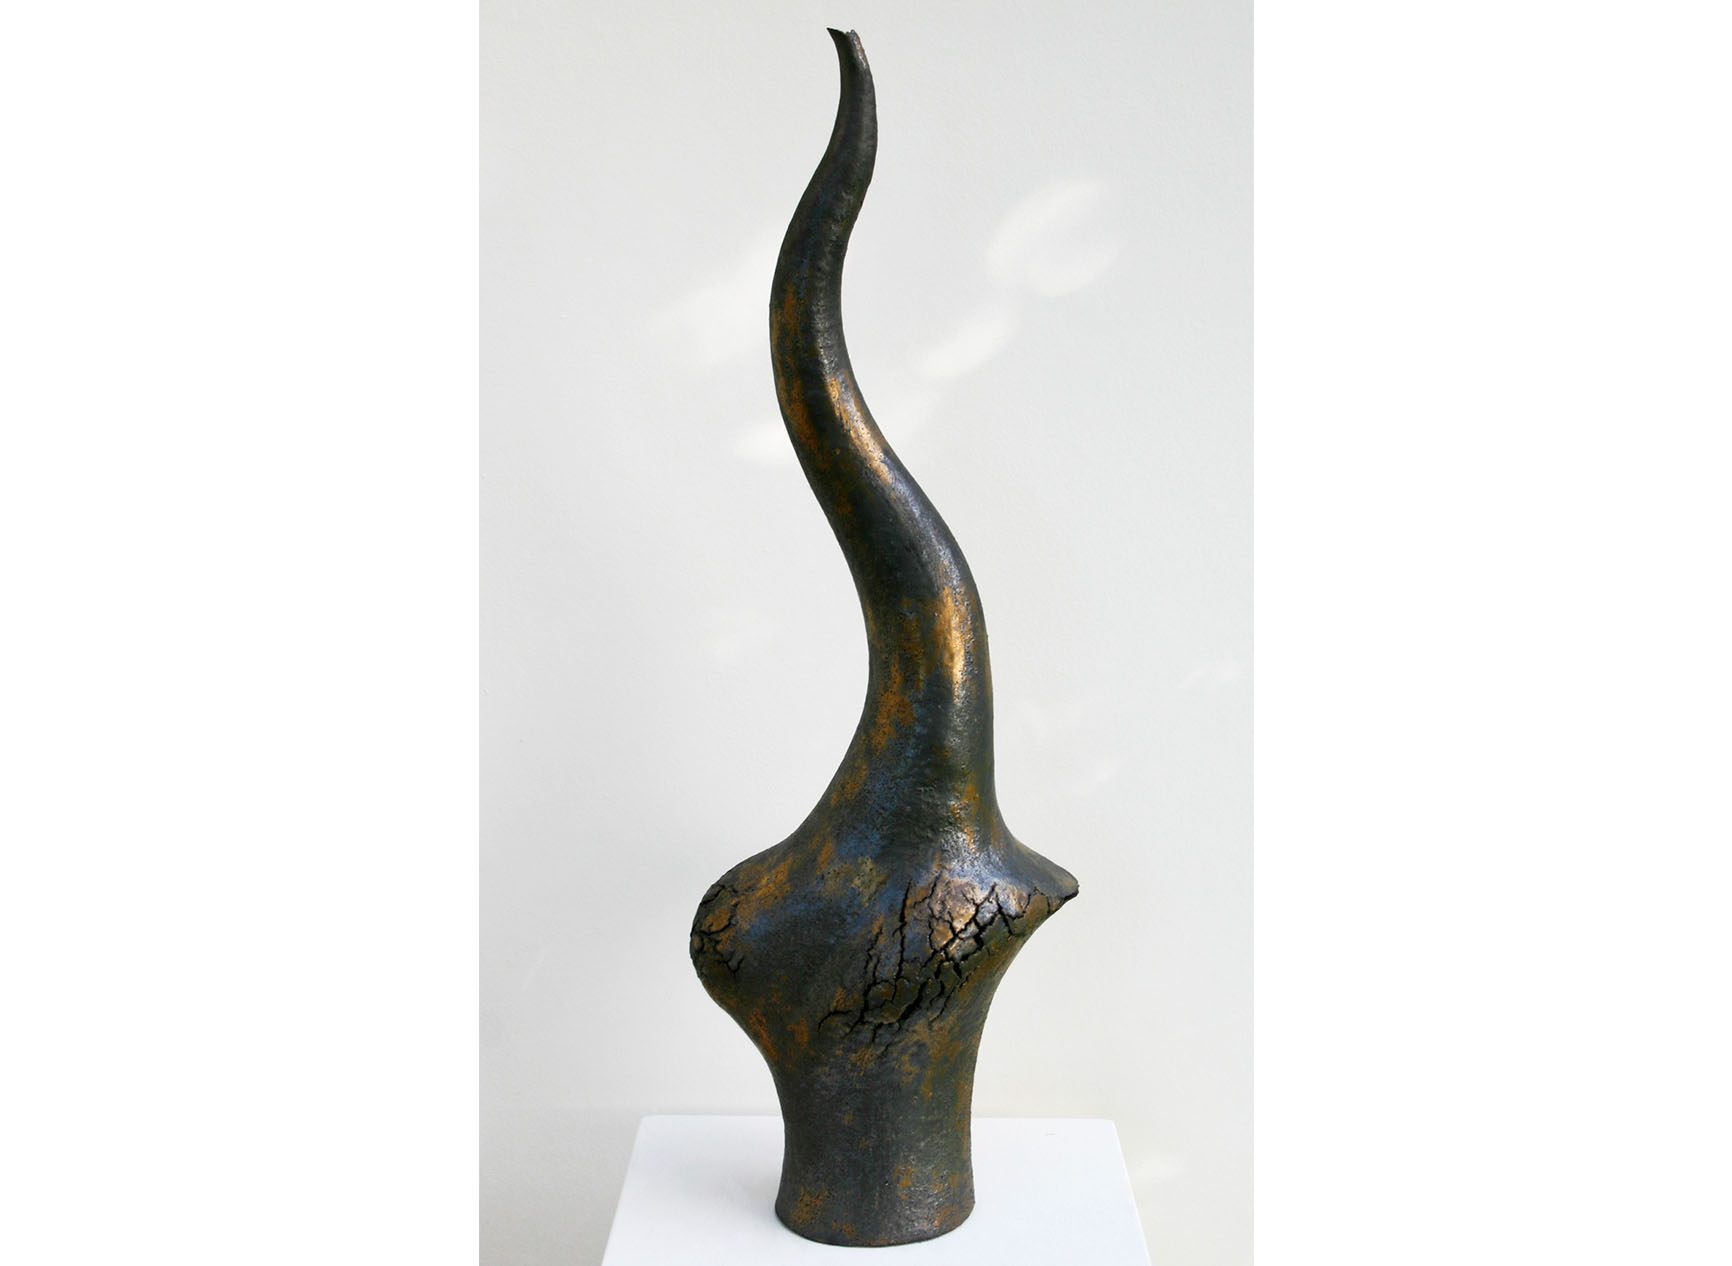 Tall curvacious black sculpture with gold flecks and cracks, called The Coming of Age